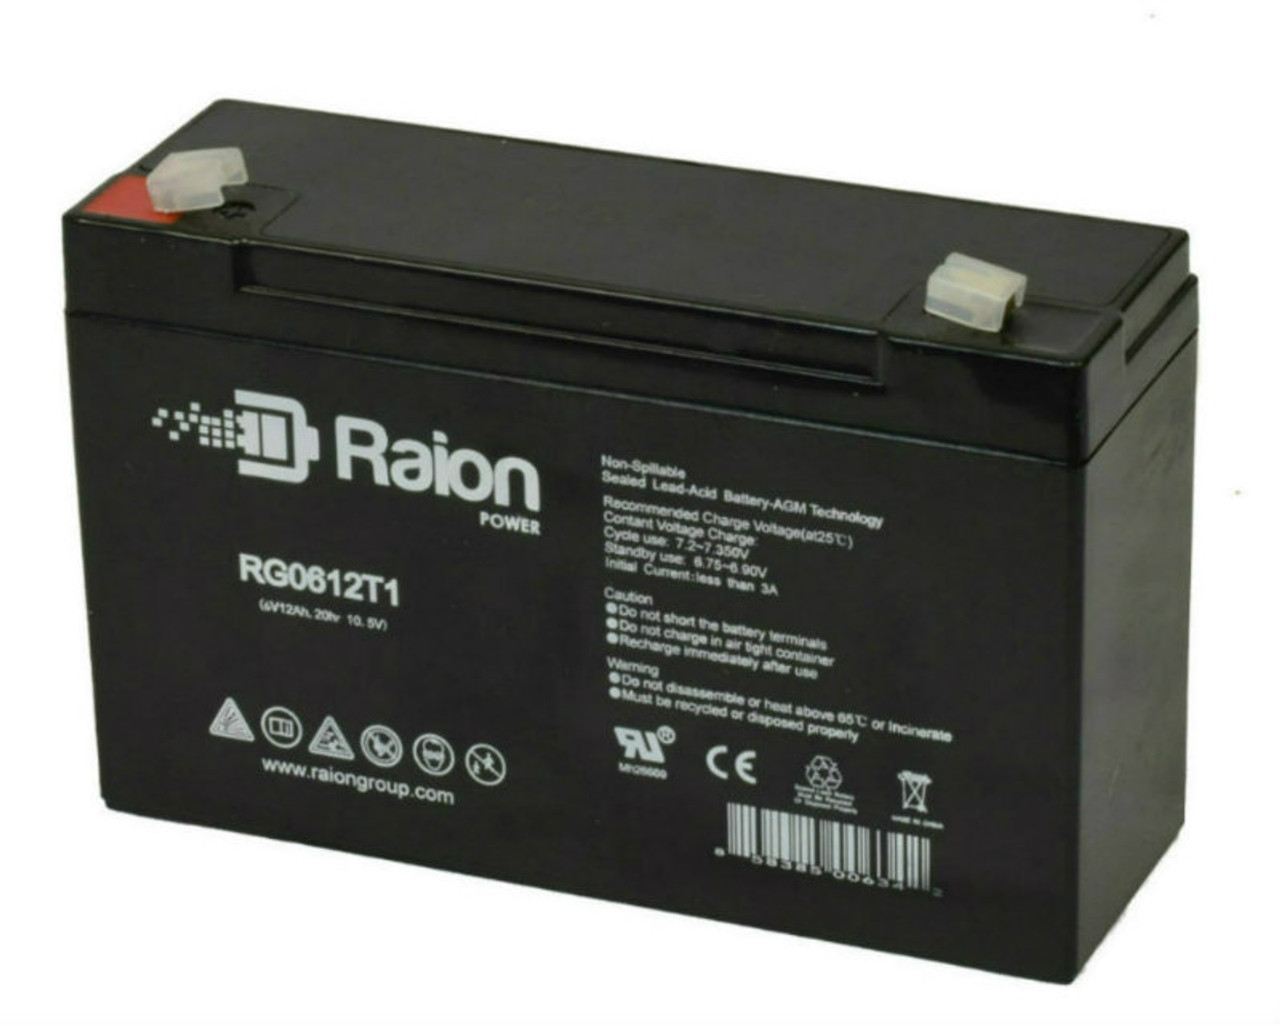 Raion Power RG06120T1 Replacement Battery for Ohio Modulus 2 Plus Medical Equipment